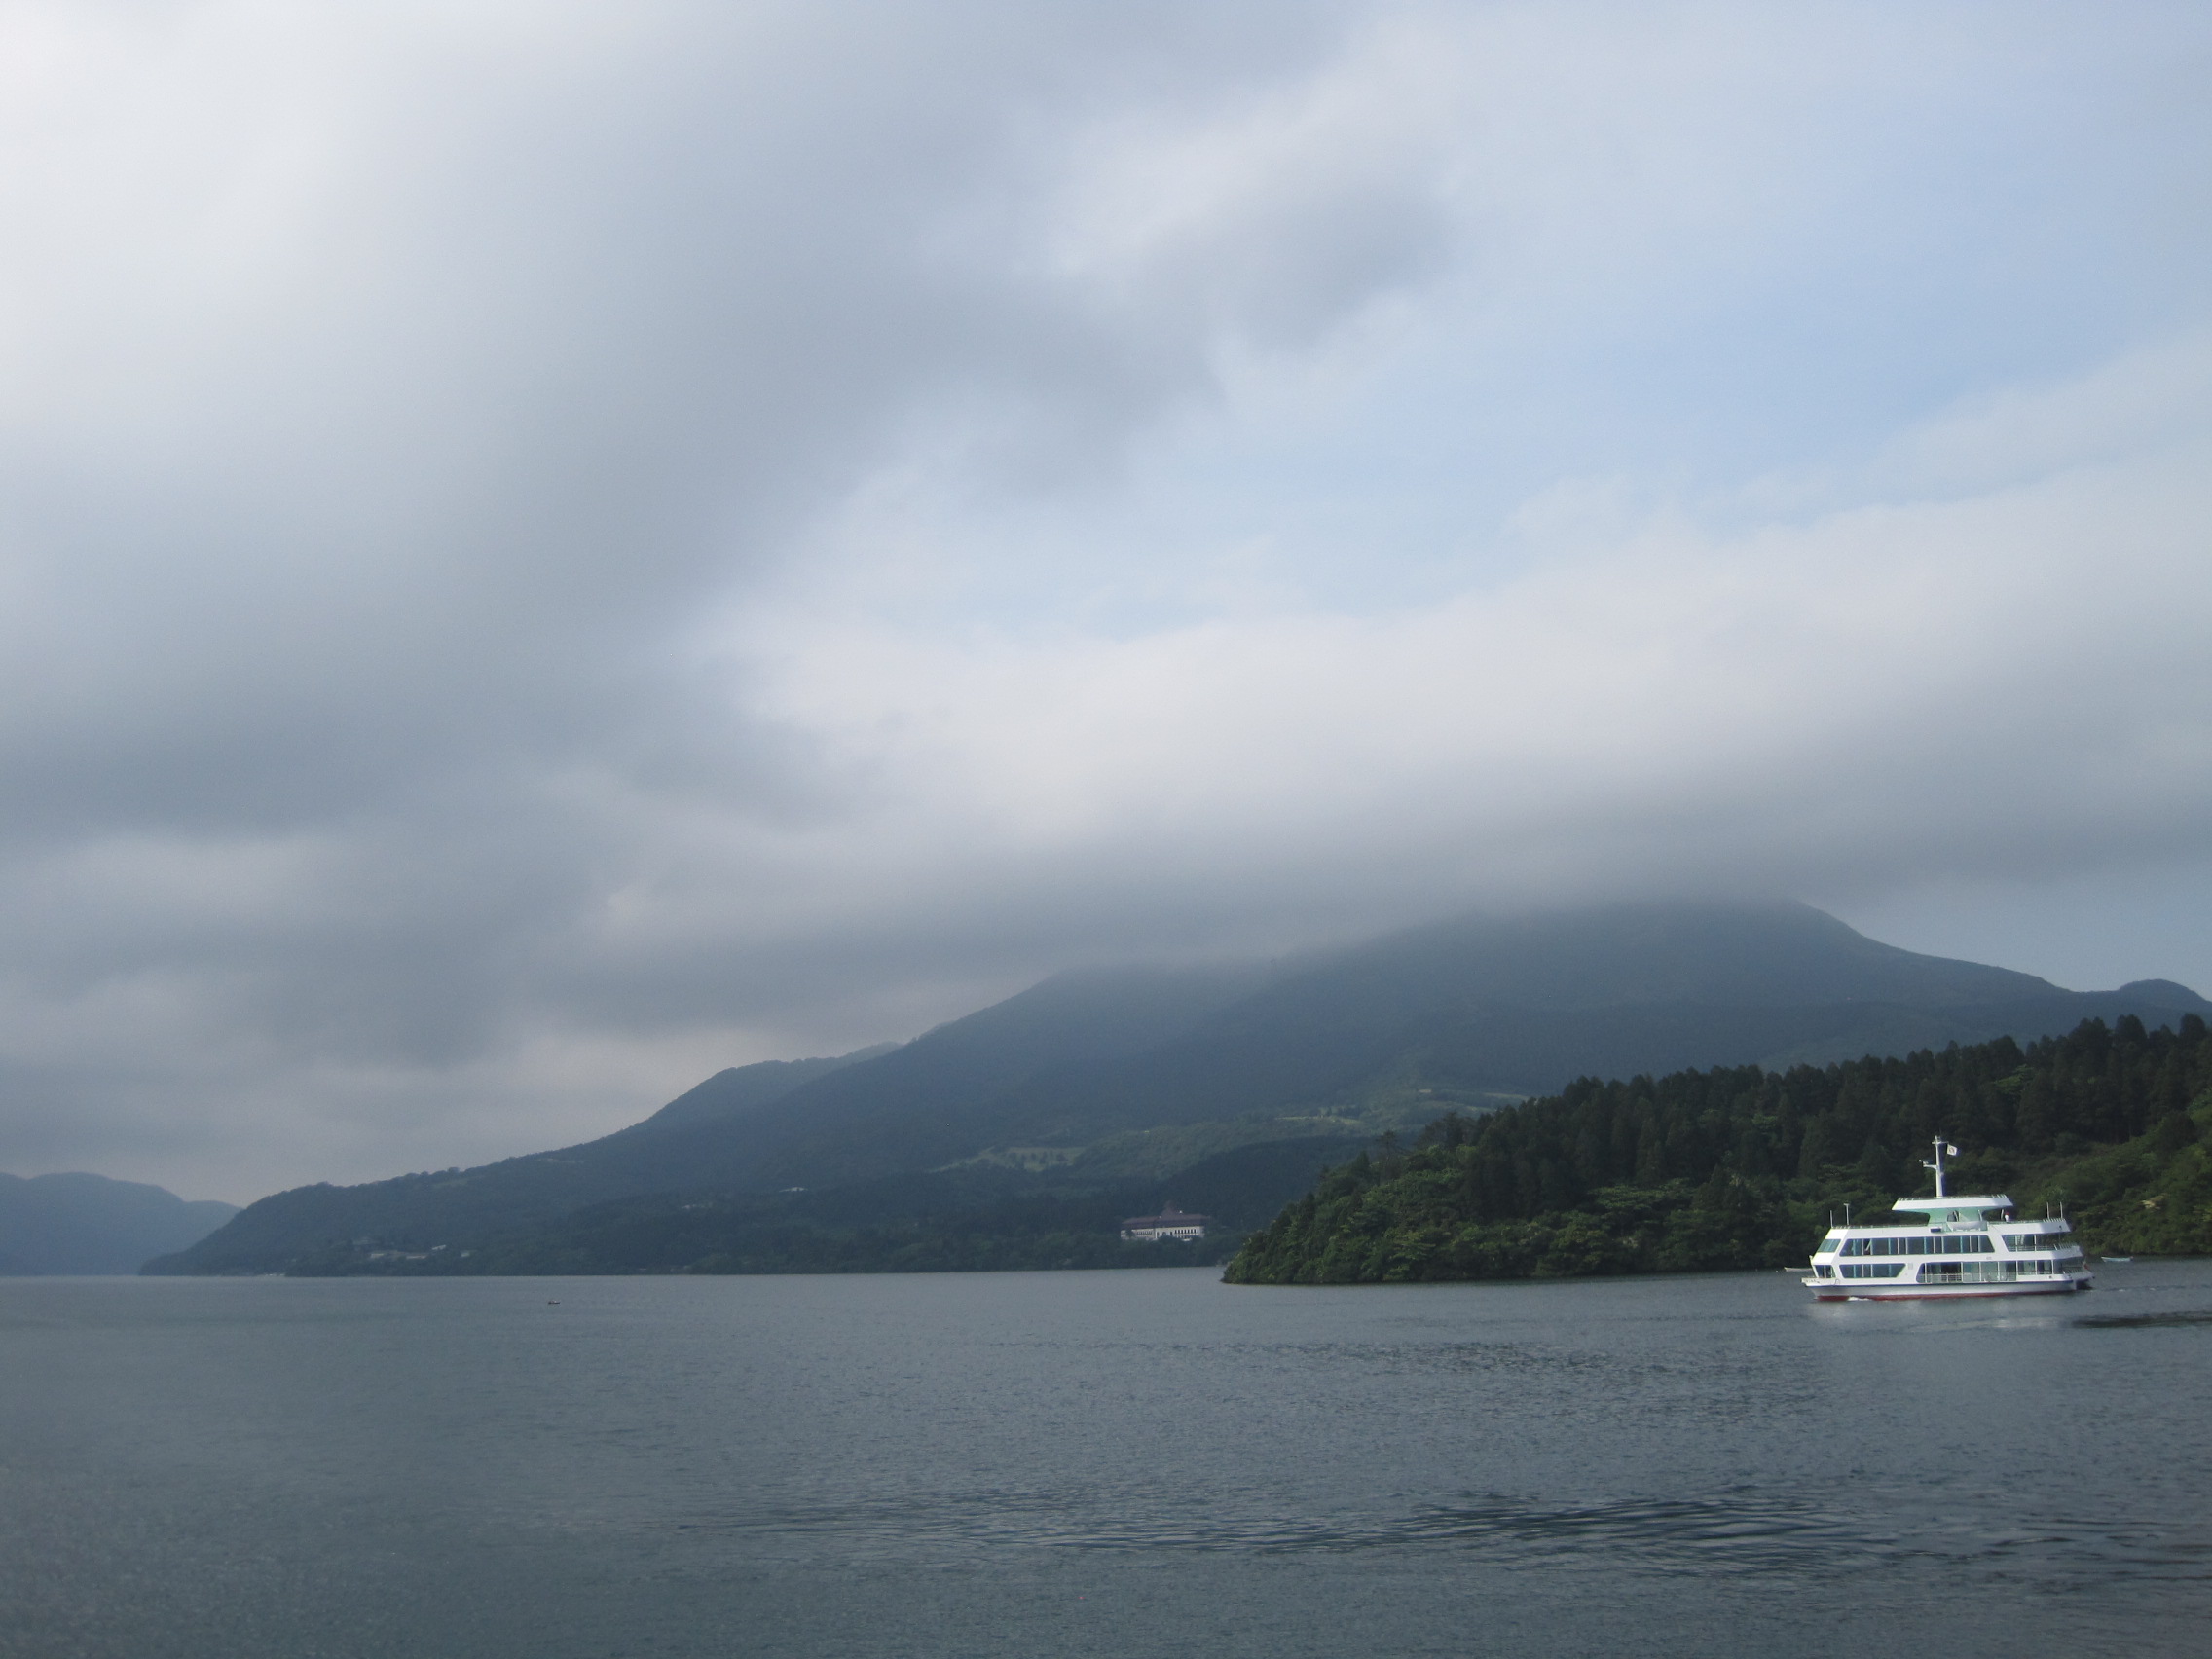 Going for the lake itself is worth the trip! I went in June for 2 days, 1 night, and enjoyed the ferries from dock to dock.